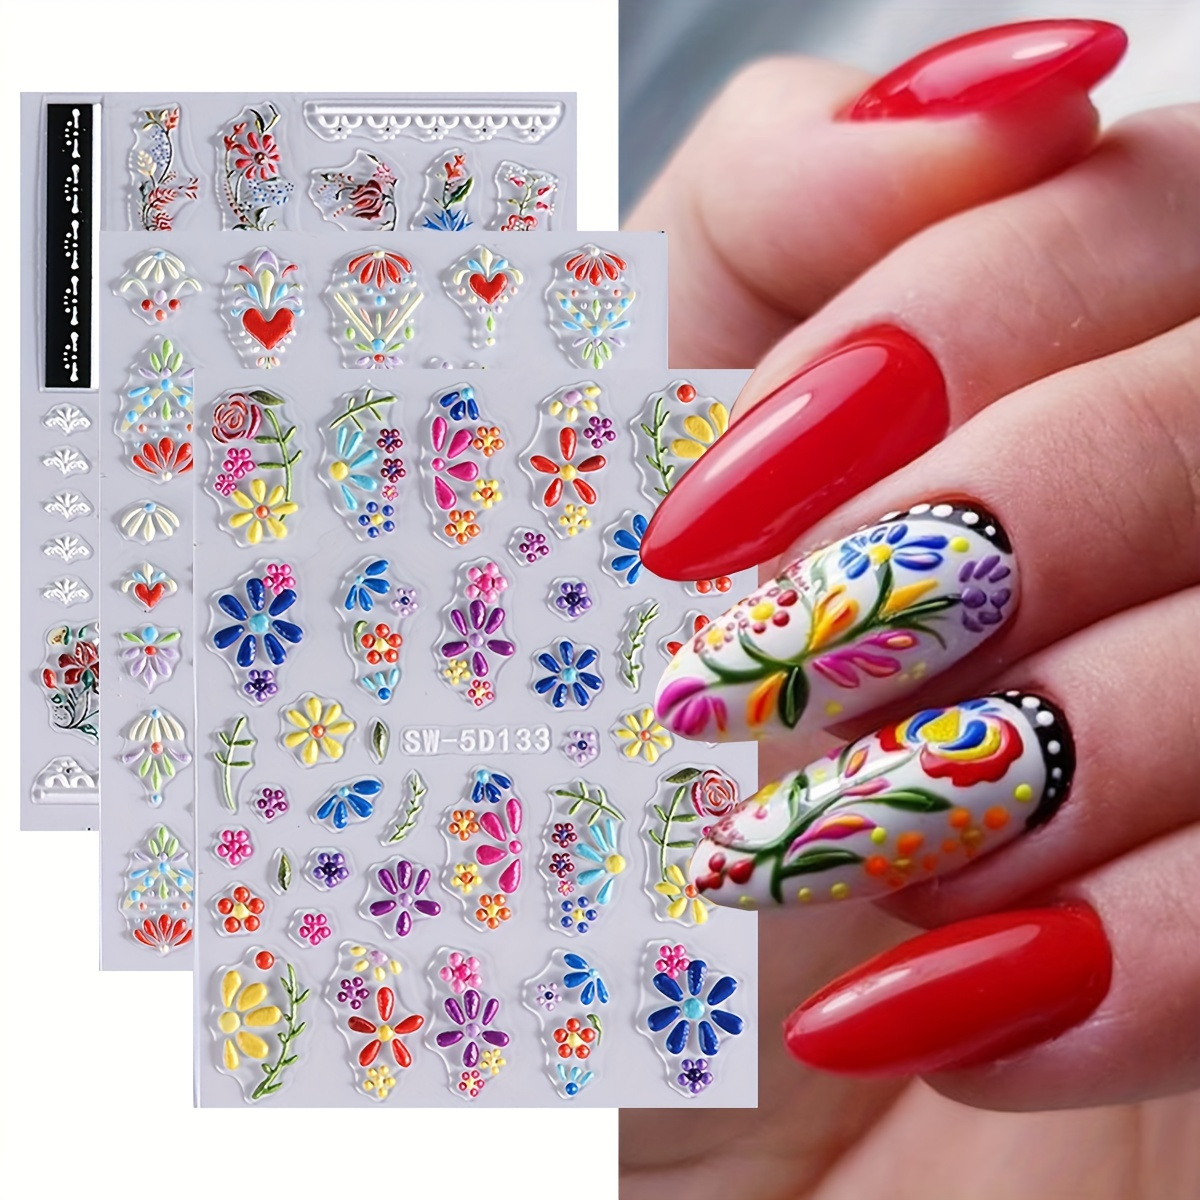 

5d Embossed Colorful Flower Nail Art Stickers - Plastic Self-adhesive Floral Decals With Fantasy Theme For Spring Manicure Decoration - Single Use, Matte Finish, Unscented (pack Of 3 Sheets)